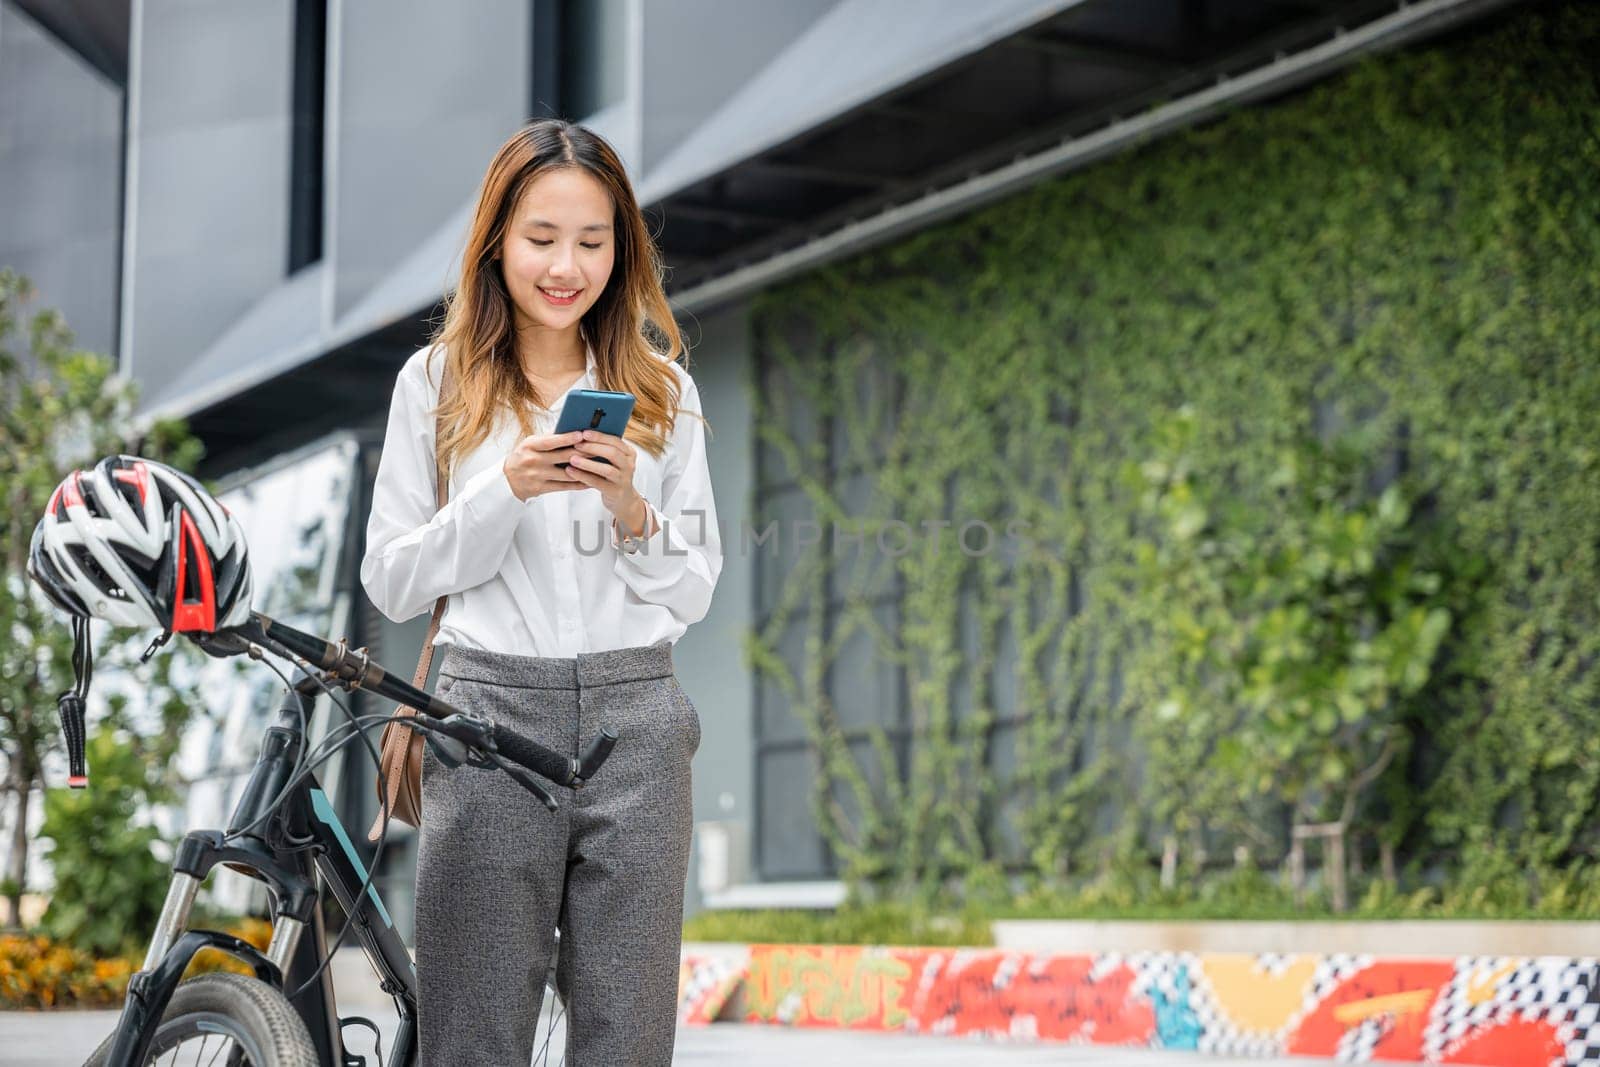 A young businesswoman smiling and holding her smartphone enjoys a bike ride through the city. Her ability to blend work and fun is a testament to the modern concept of work-life balance. by Sorapop